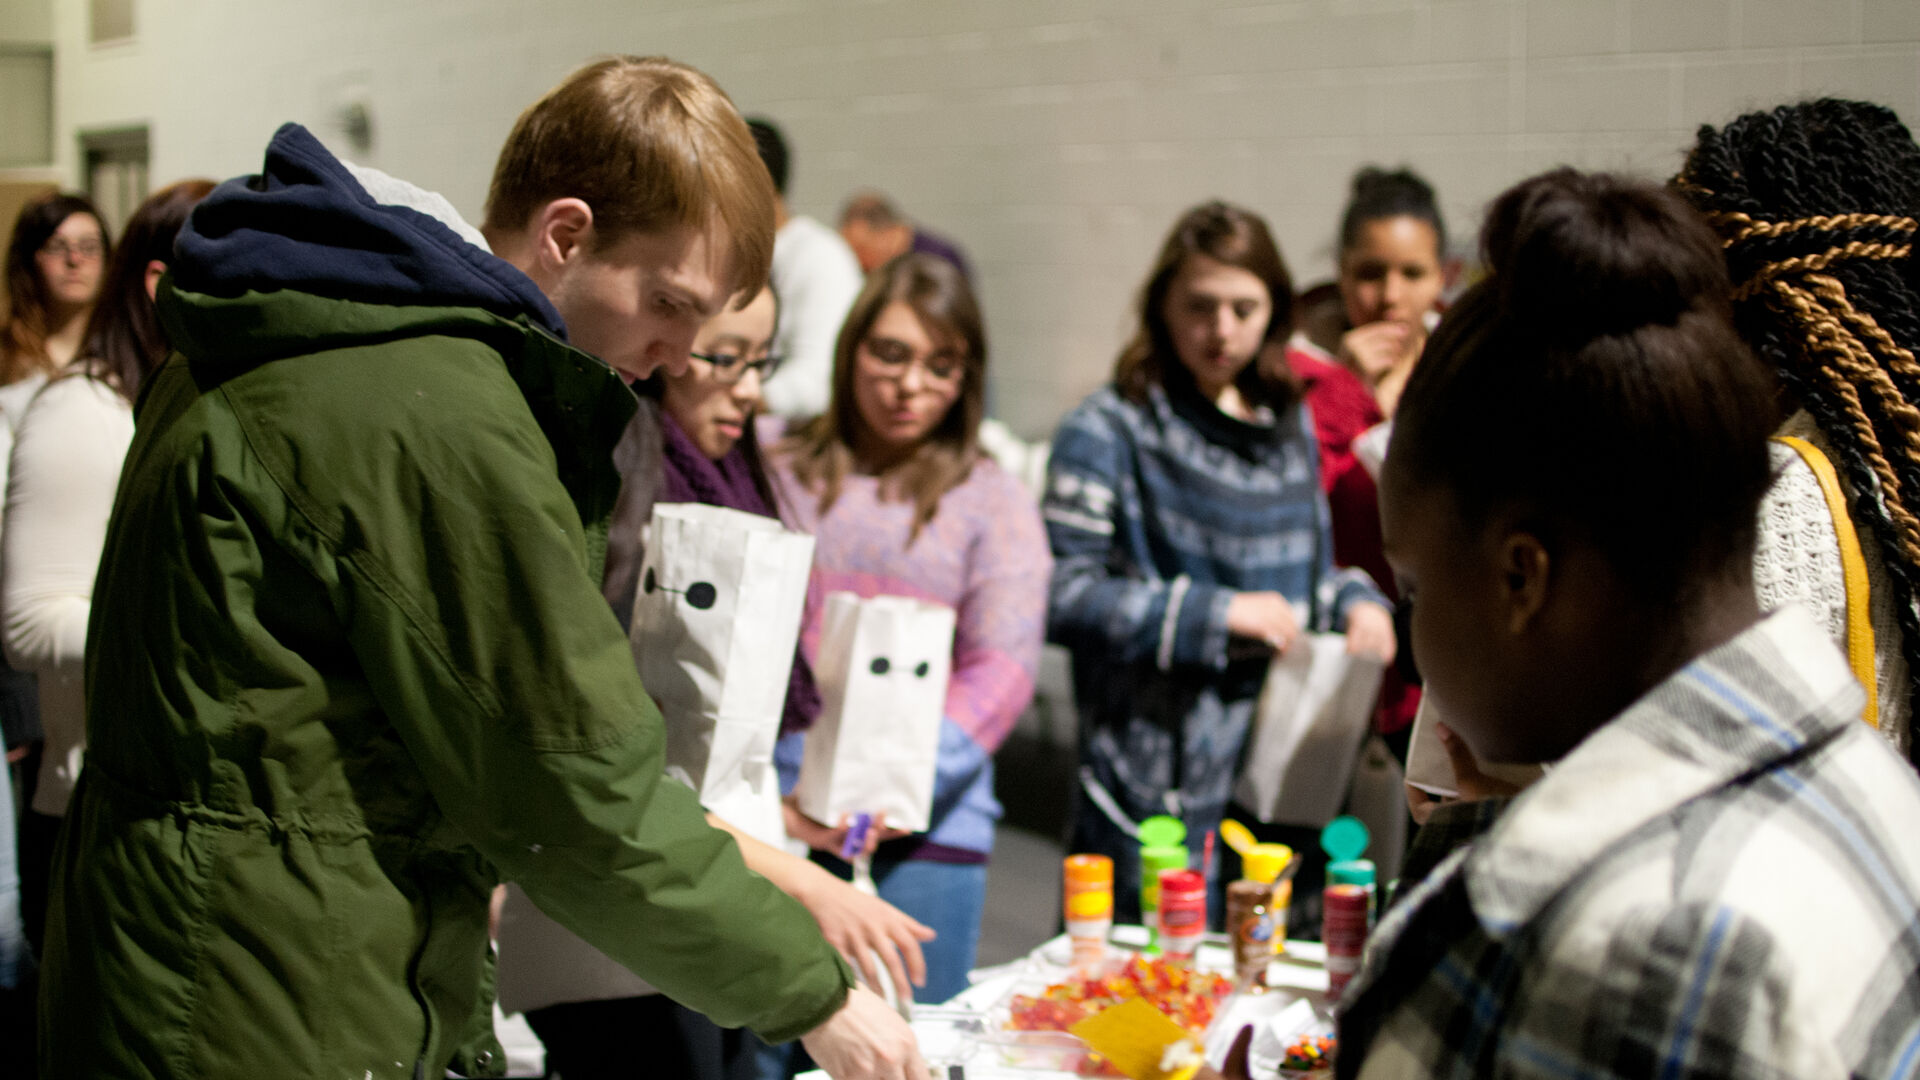 students fill goodie bags at table during accepted students weekend